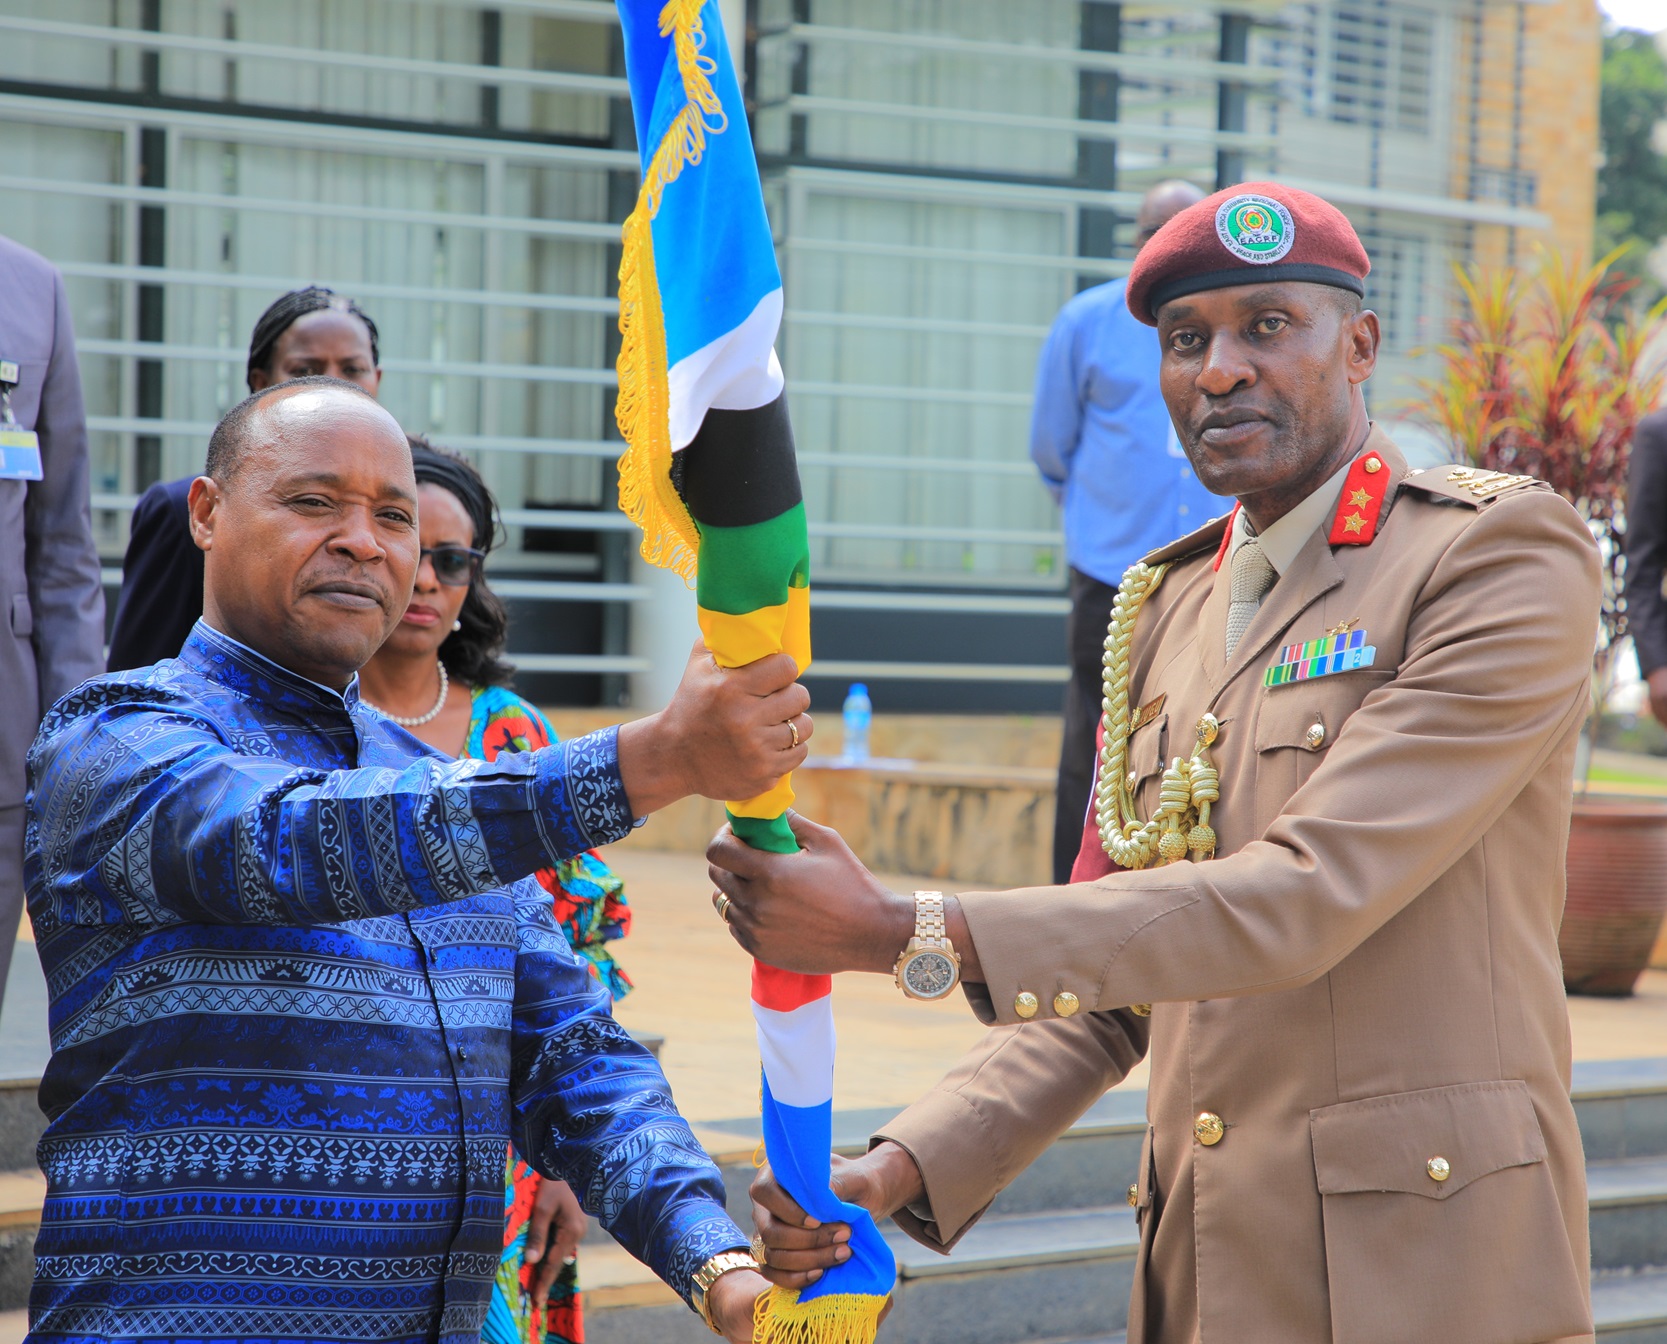 EAC reaffirms its commitment to restoration of peace in Eastern DRC